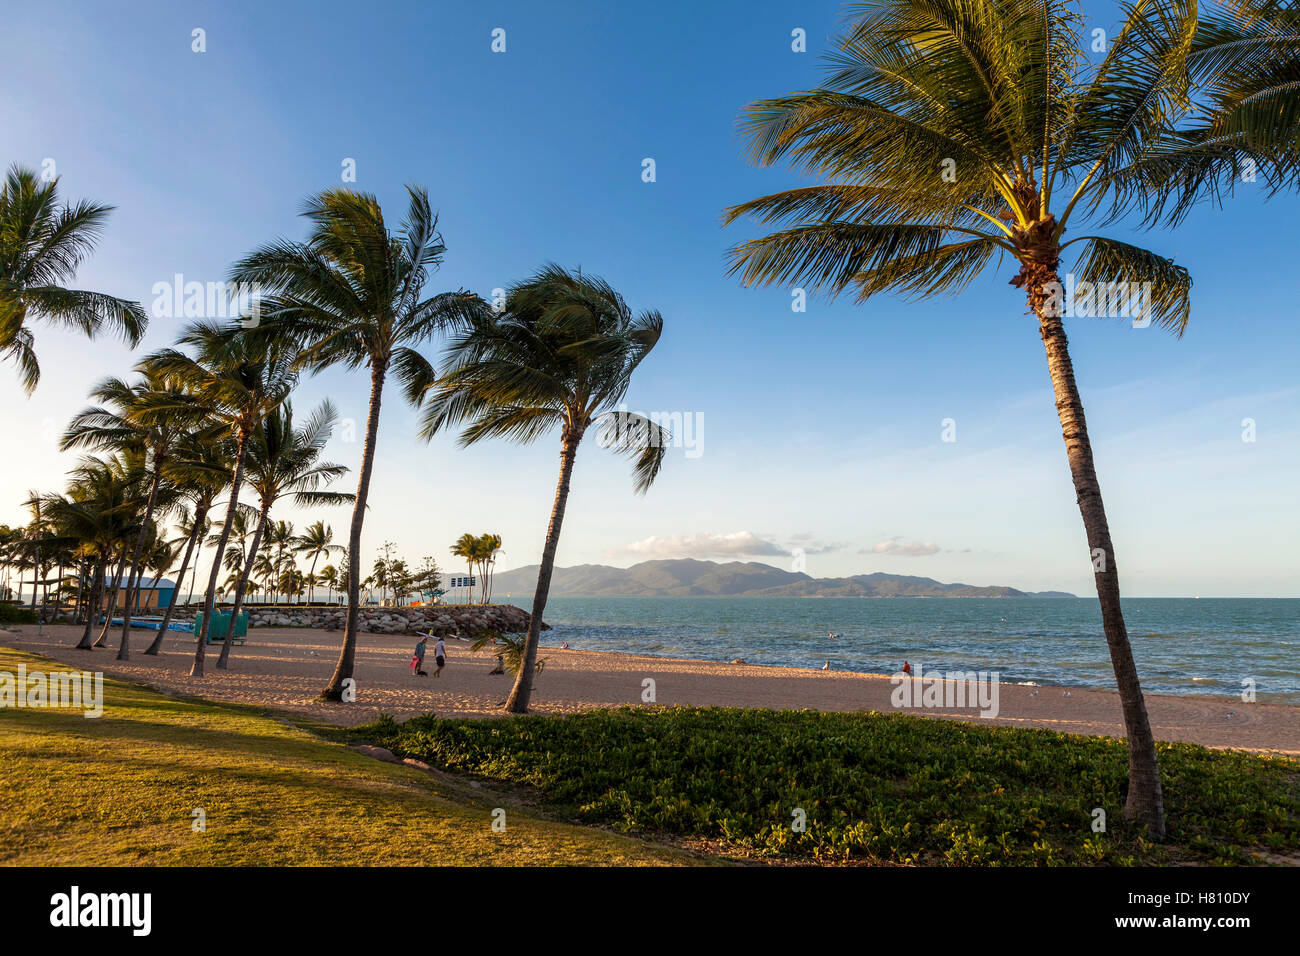 The Strand, Australia, Queensland, Townsville on the sea coast, with palm trees blowing in the wind. Stock Photo